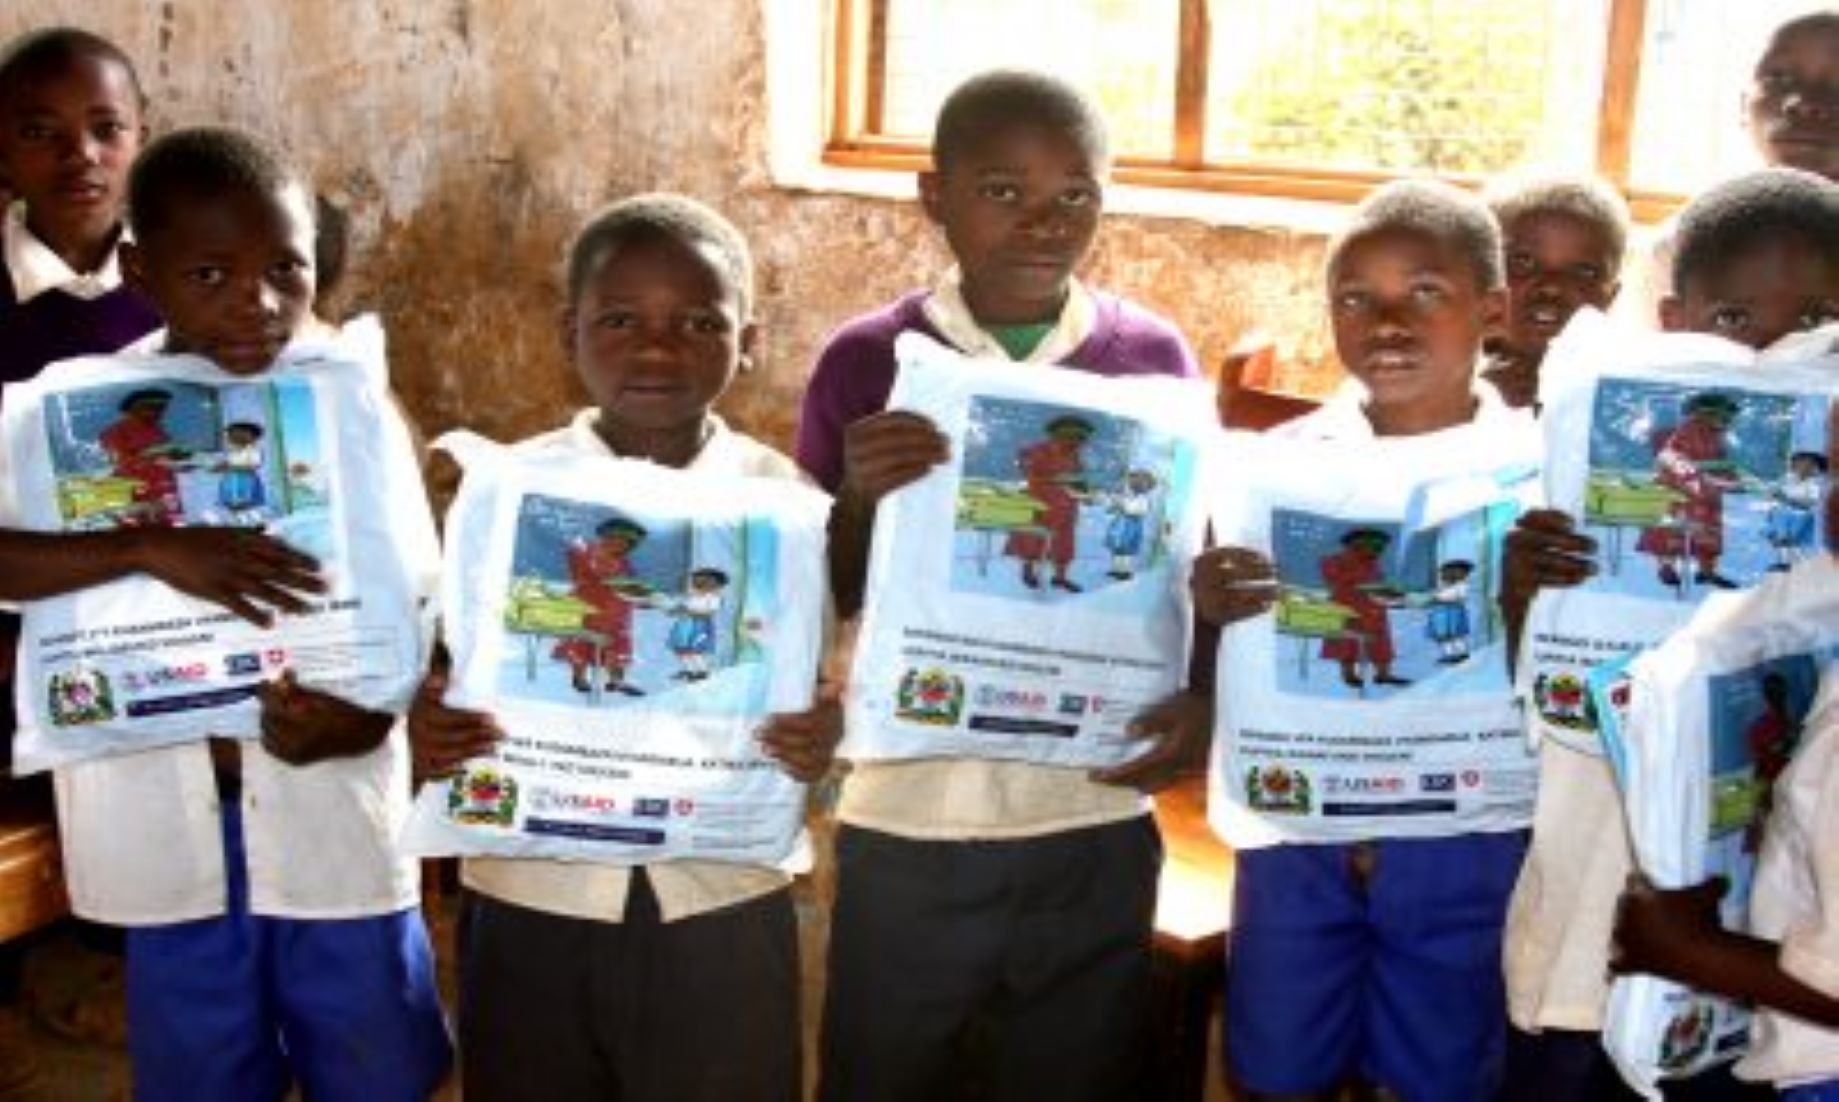 Over 500,000 Mosquito Nets To Be Distributed To Pupils In Tanzania’s Tanga Region